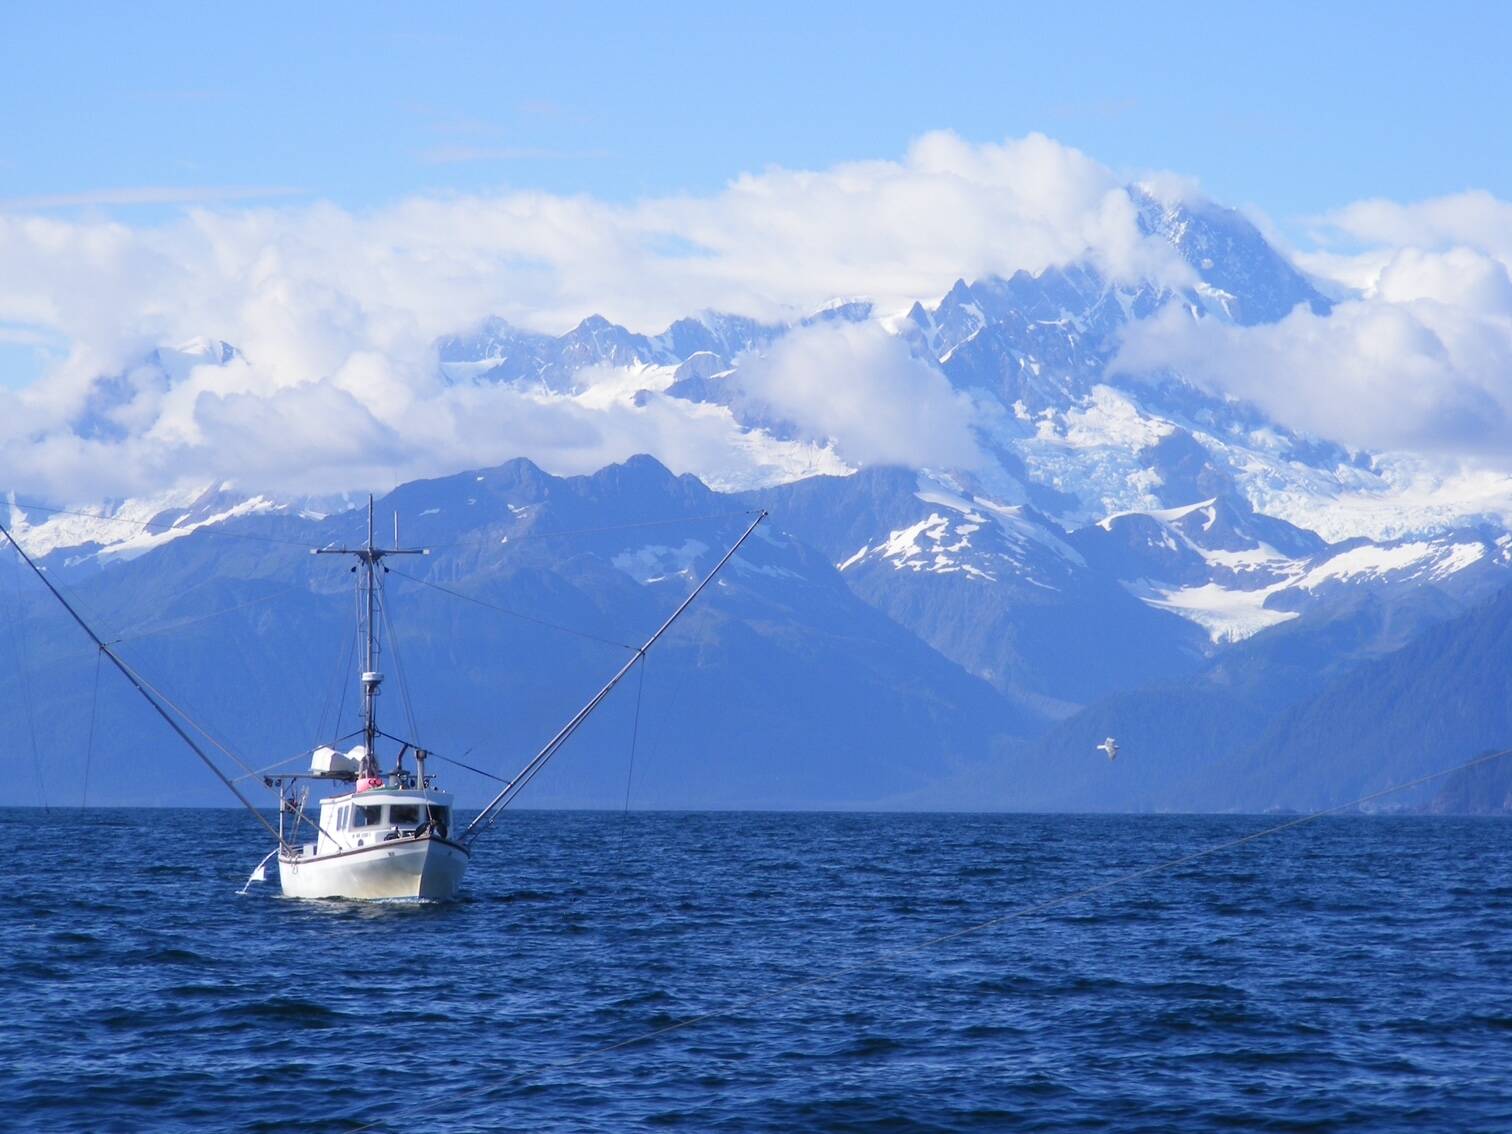 TommyL II sails the open waters of Alaska in search of wild salmon for the Southeast Alaska based company Shoreline Wild Salmon, which was recently recognized for its excellence in quality by Good Housekeeping Institute Nutrition Lab. (Courtesy Photo / Joe Emerson)